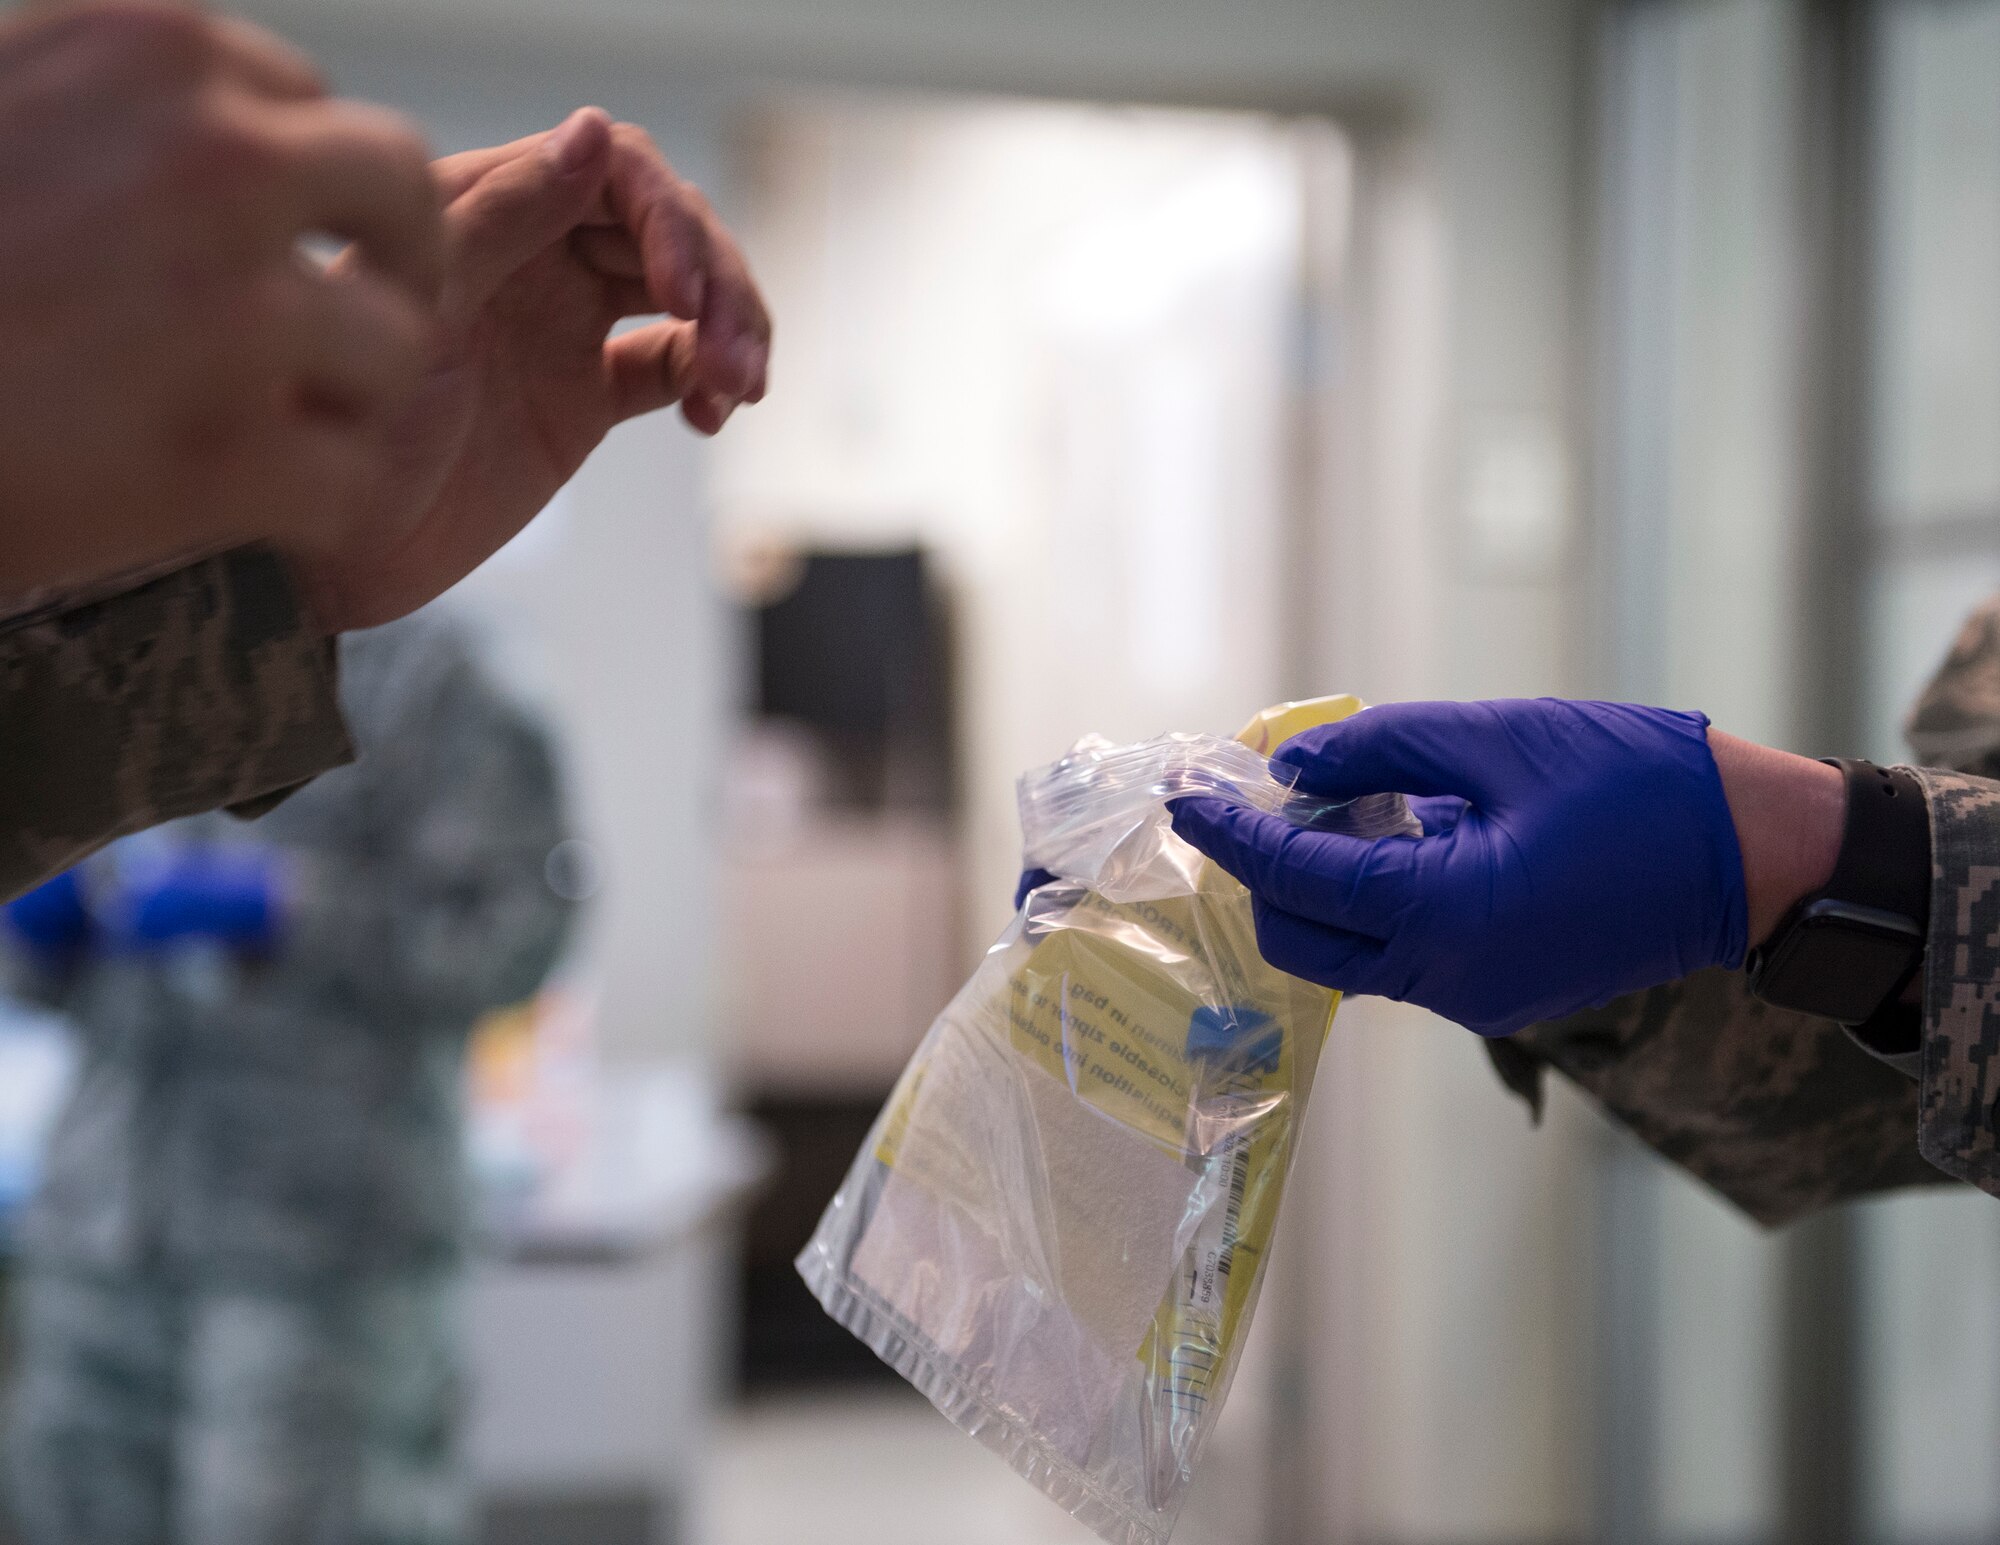 U.S. Air Force Airman from the 133rd Medical Group, collects the COVID-19 test in St. Paul, Minn., June 4, 2020.